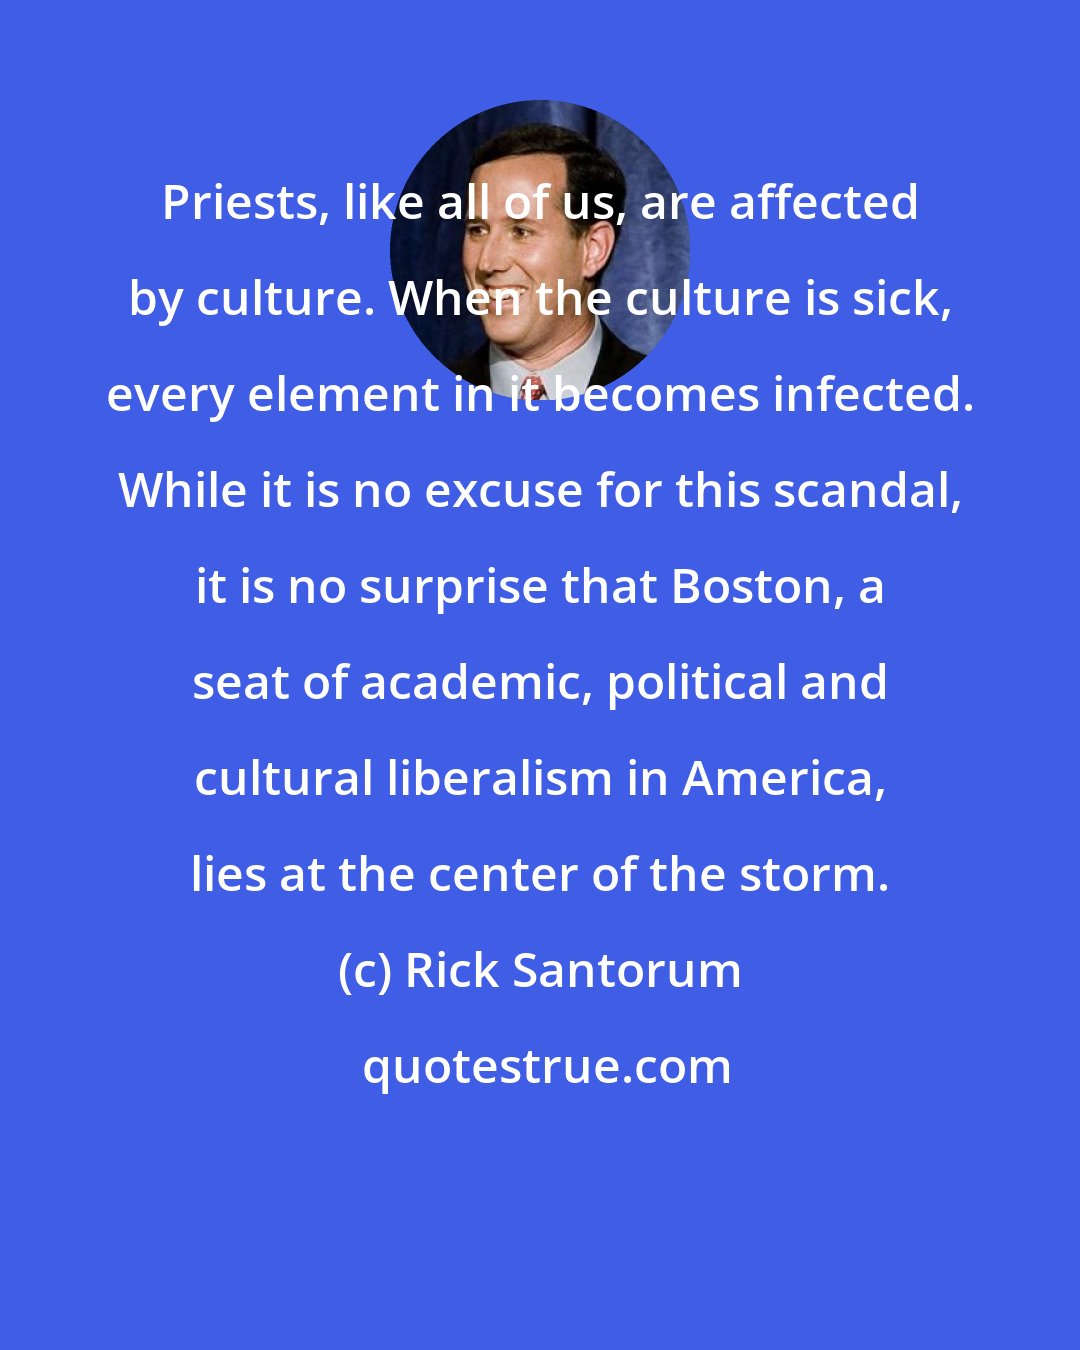 Rick Santorum: Priests, like all of us, are affected by culture. When the culture is sick, every element in it becomes infected. While it is no excuse for this scandal, it is no surprise that Boston, a seat of academic, political and cultural liberalism in America, lies at the center of the storm.